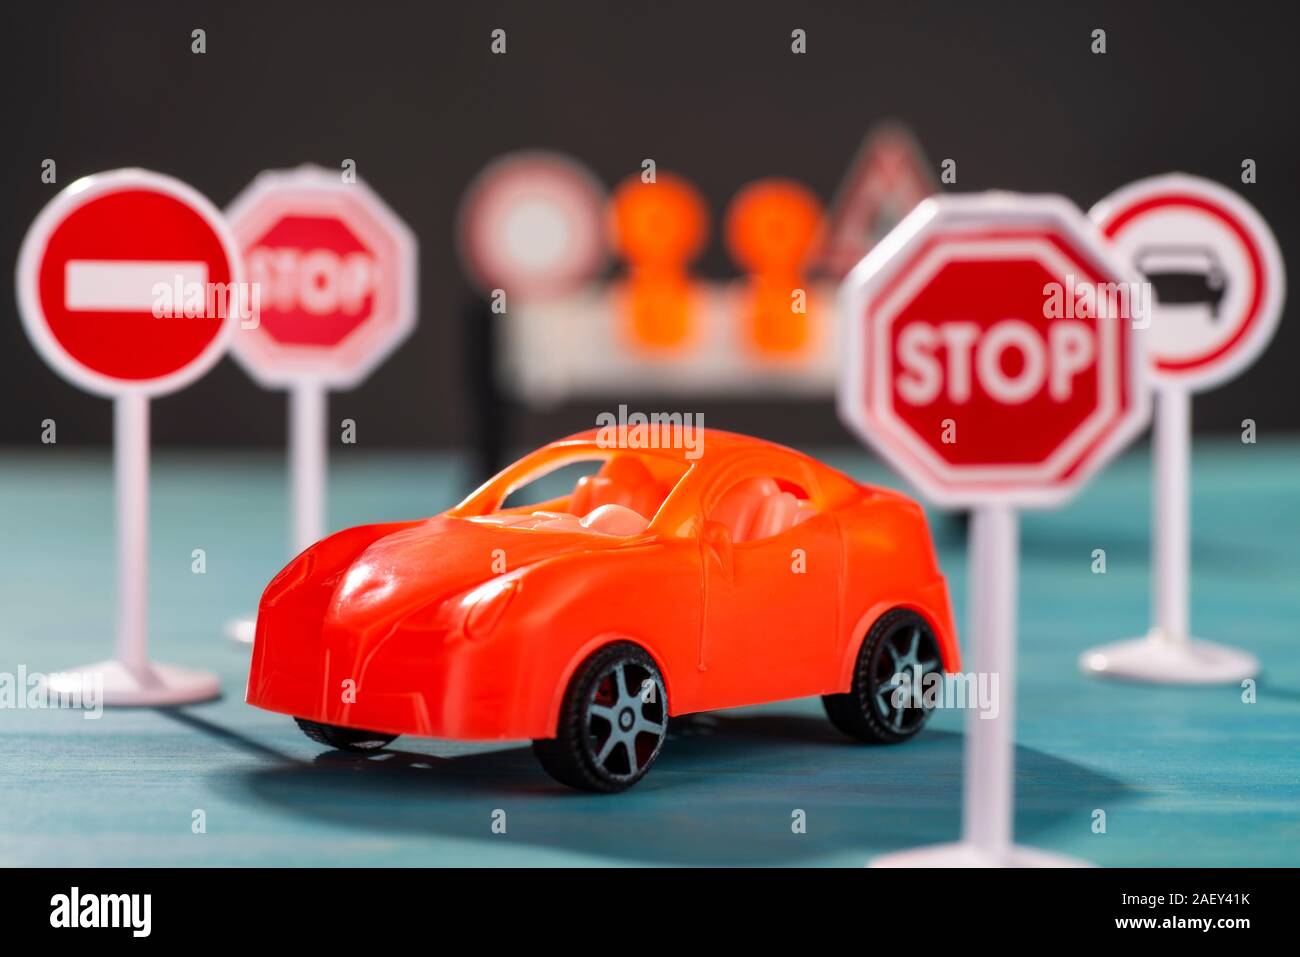 A car stands between traffic signs with prohibitions Stock Photo